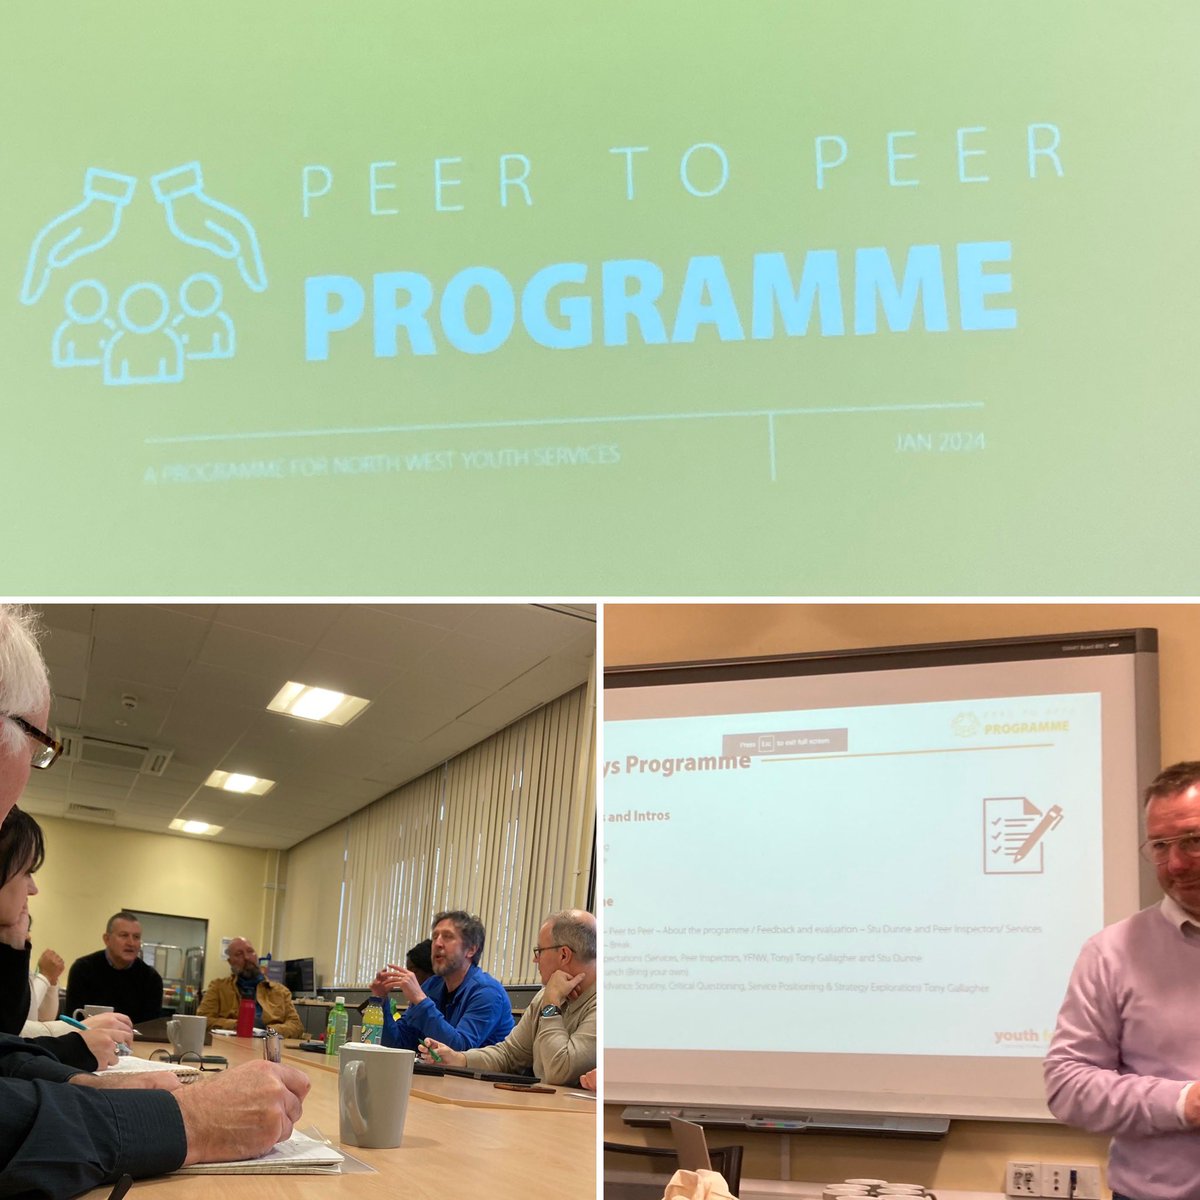 We’re @OldhamYouth today sharing with colleagues from across the #NW about our new Peer to Peer programme and the way it works reviewing and inspecting  #youthservices in #NW #youthwork #quality